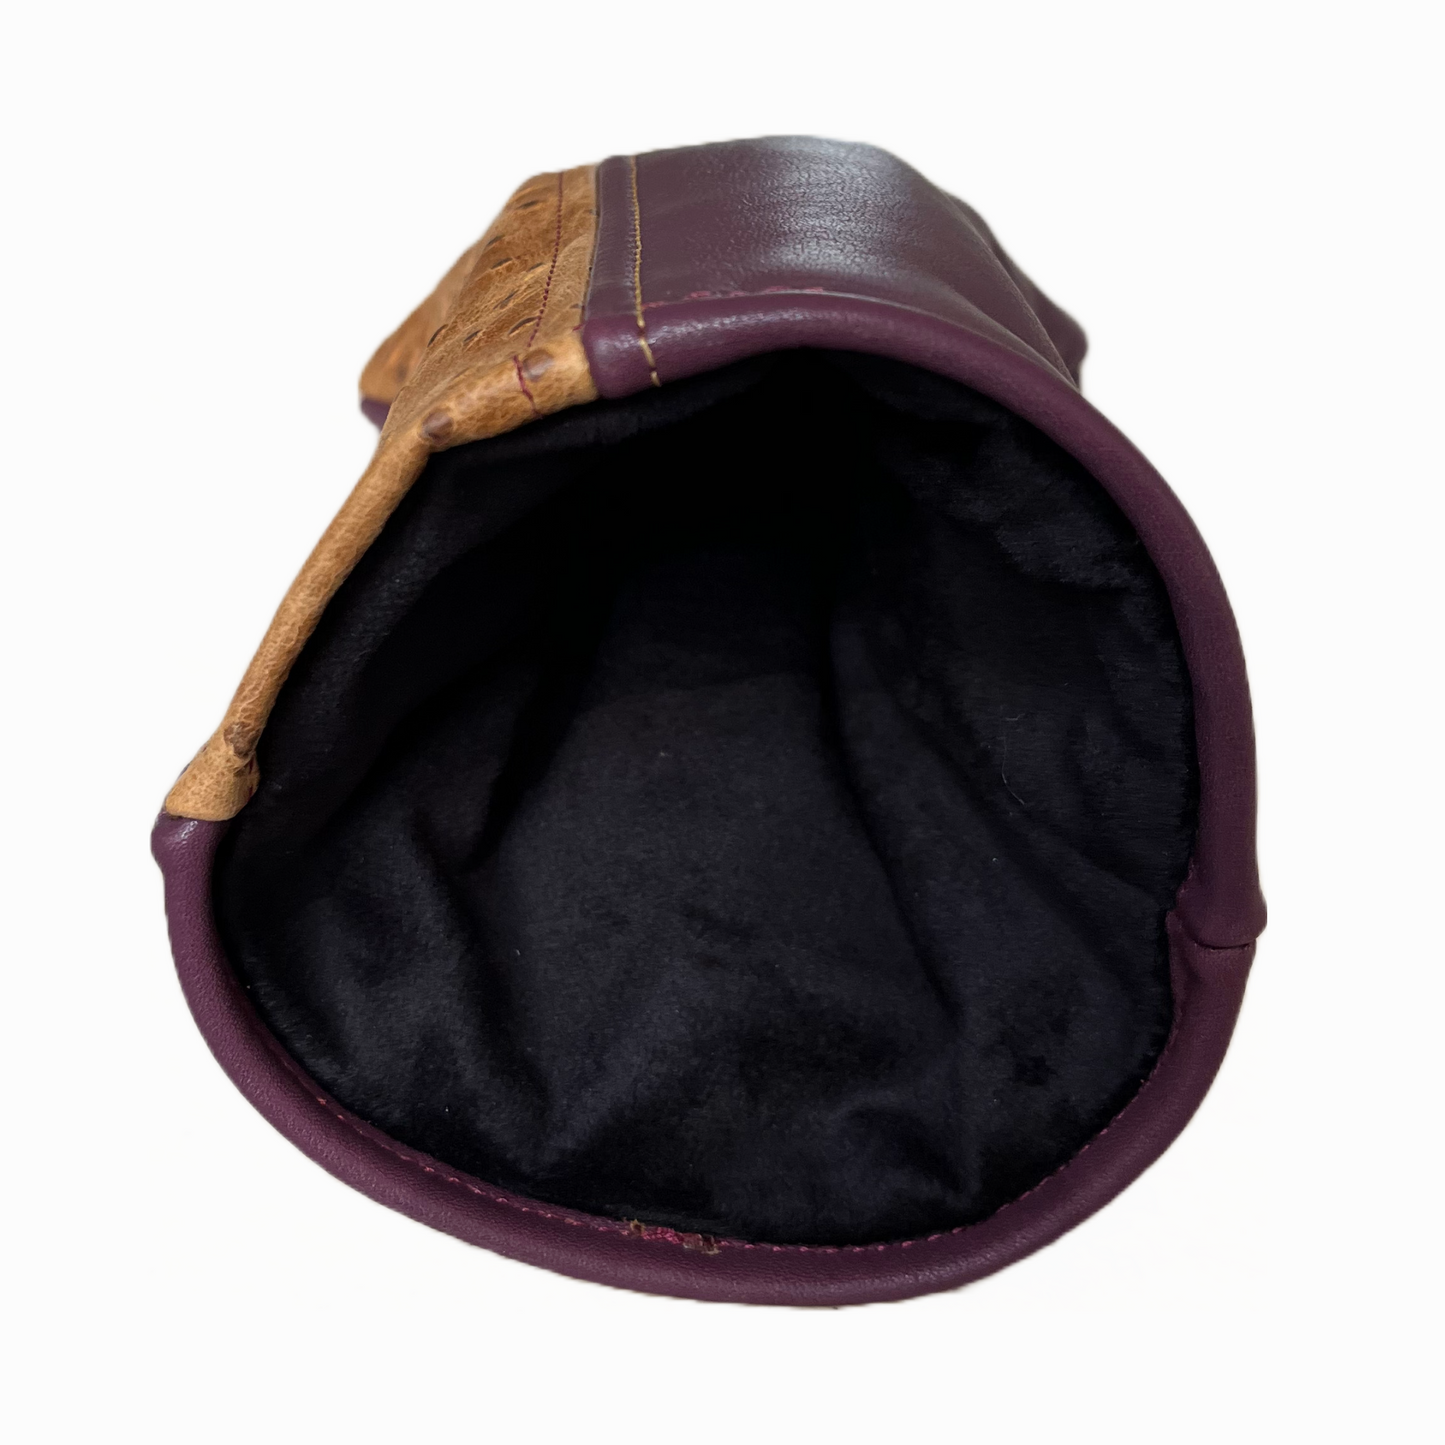 Rustic Ostrich with Plum Leather